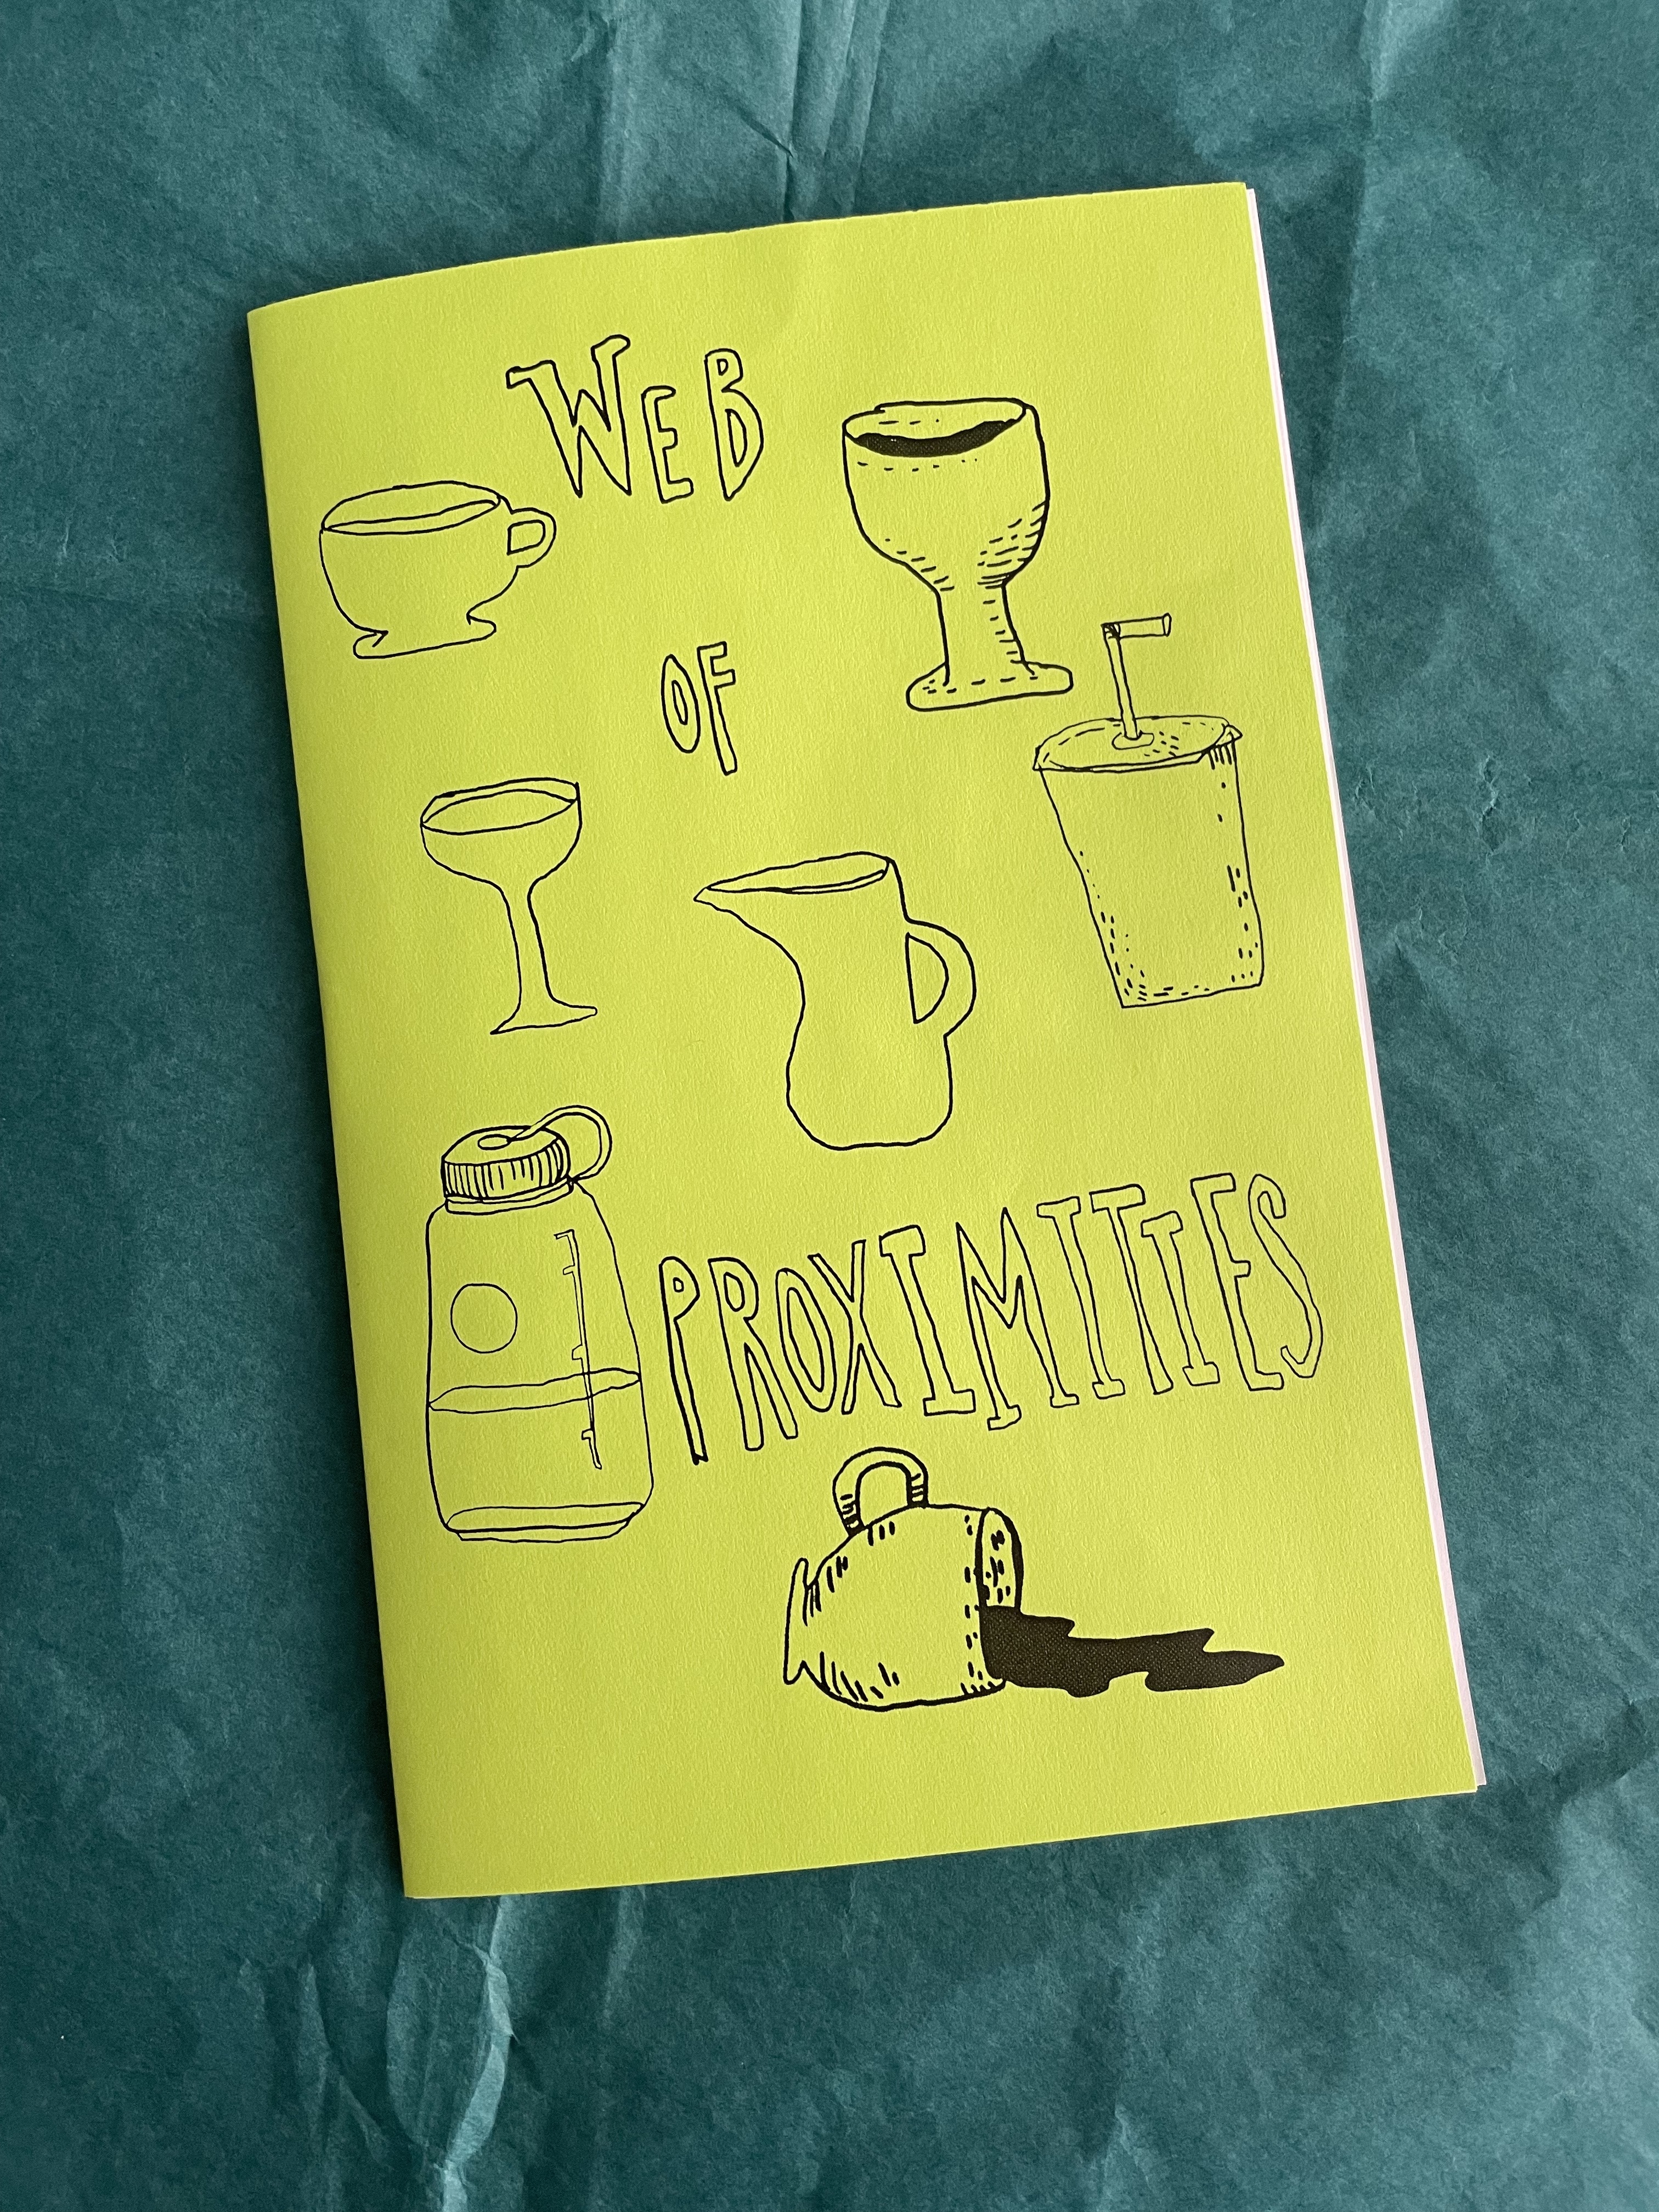 a poetry zine featuring drawings of cups on the cover